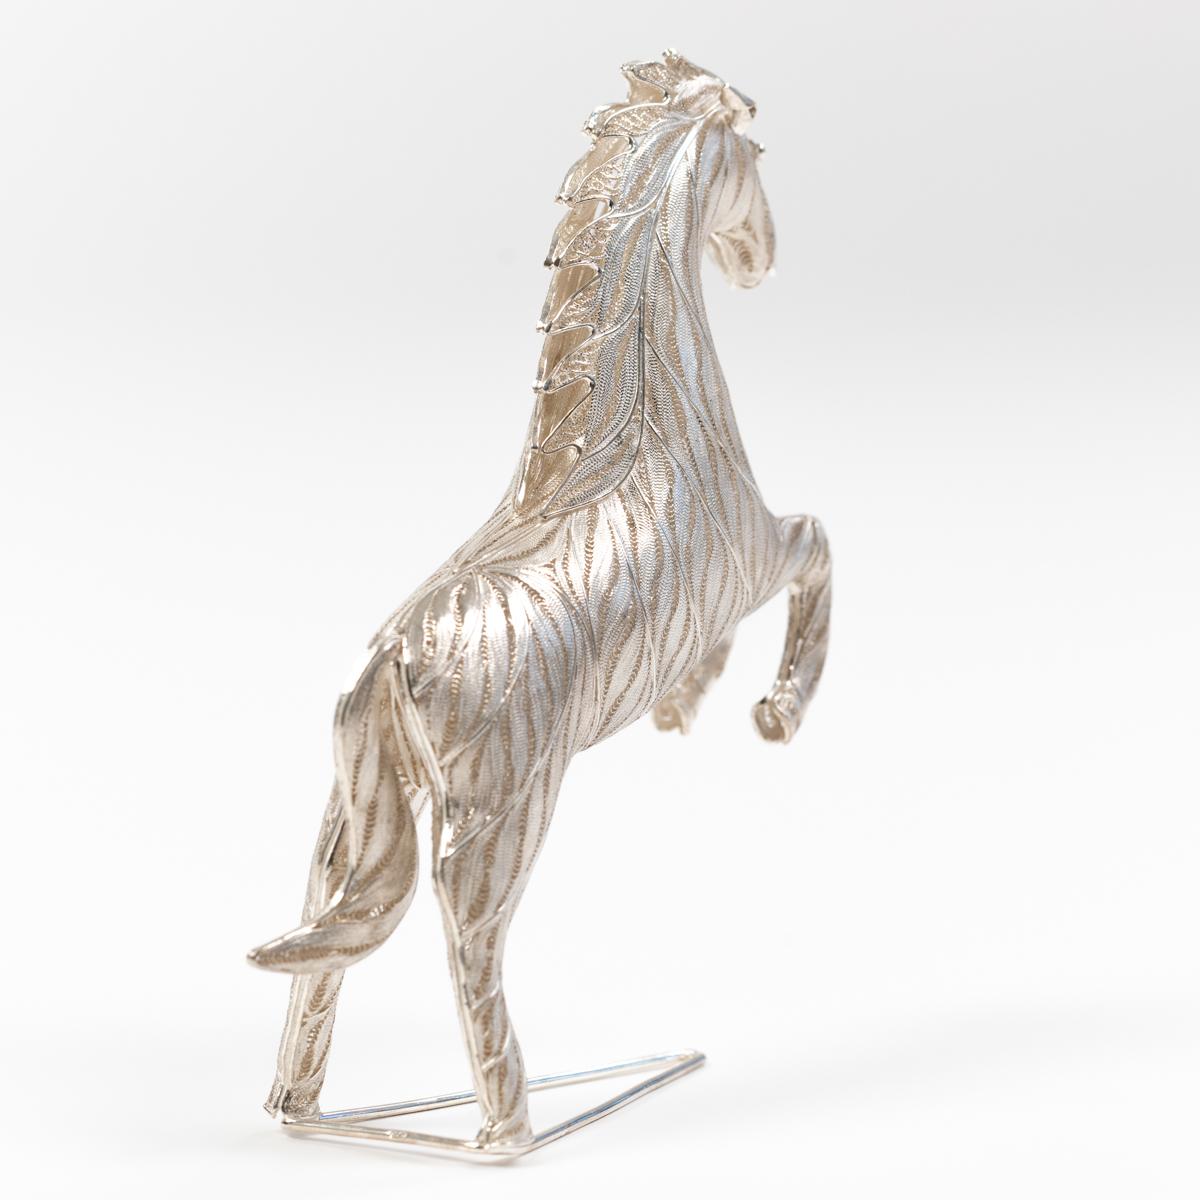 Jumping Horse Sculpture 925 Silver Handcrafted Filigree Technique Germany 2005 For Sale 1